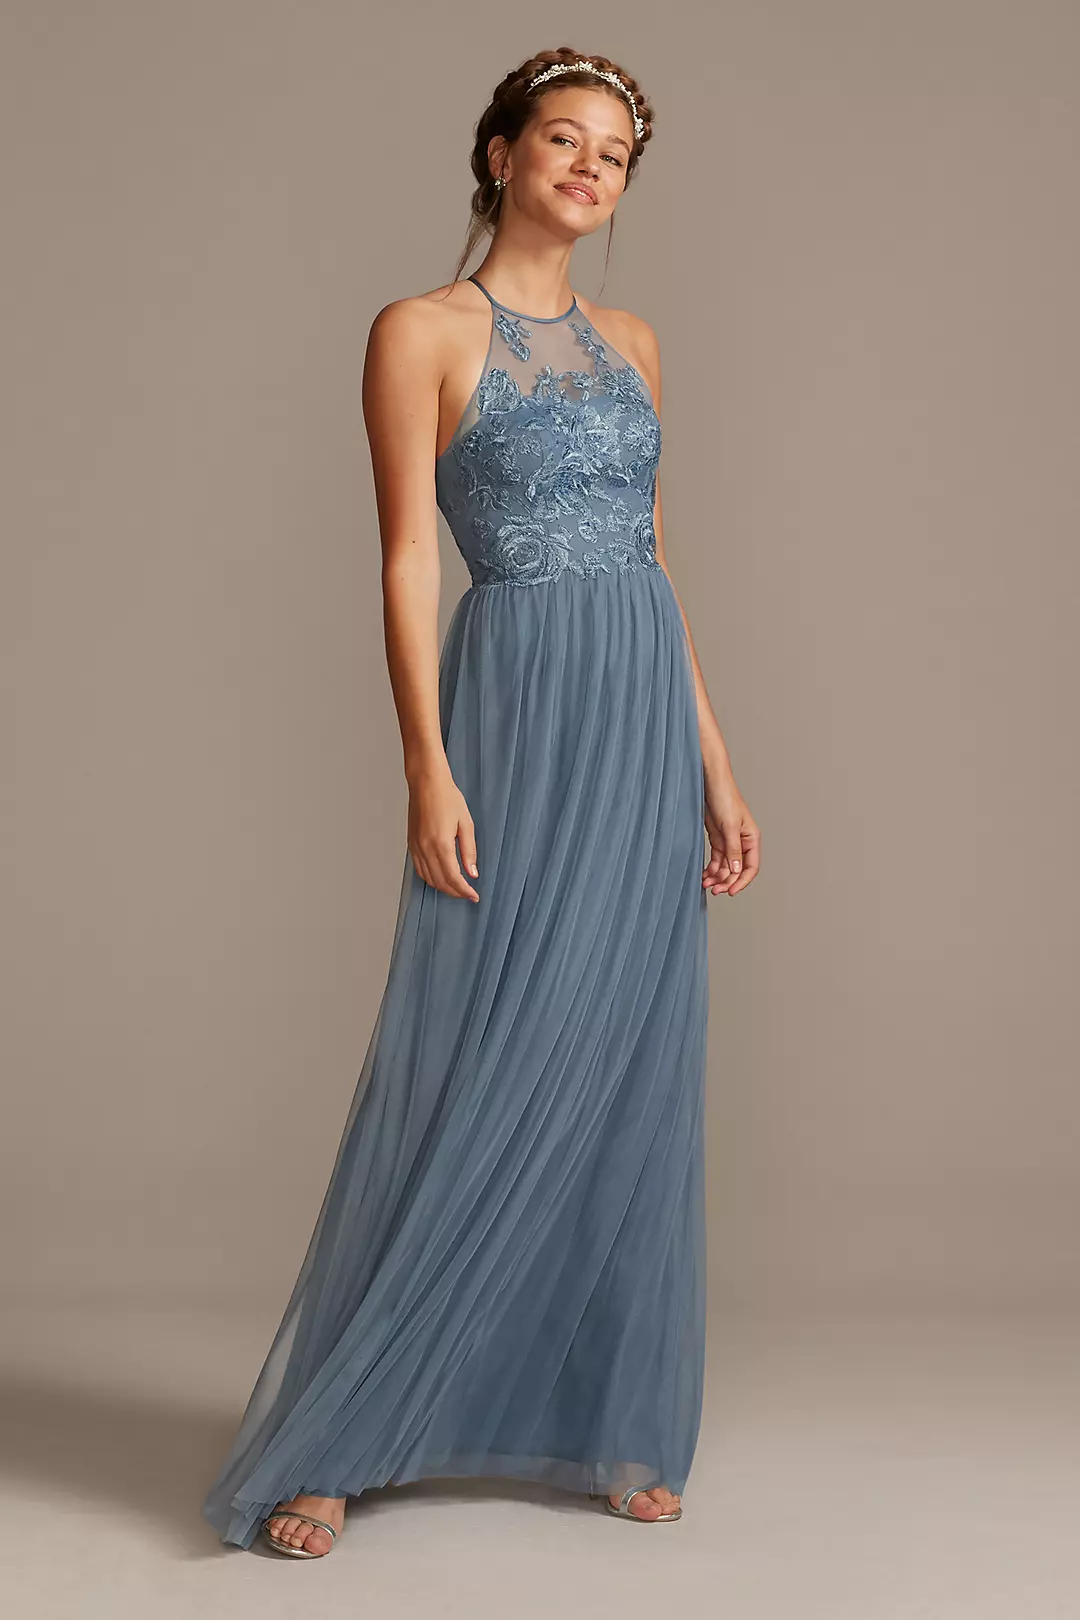 High-Neck Embroidered Soft Net Bridesmaid Dress Image 1